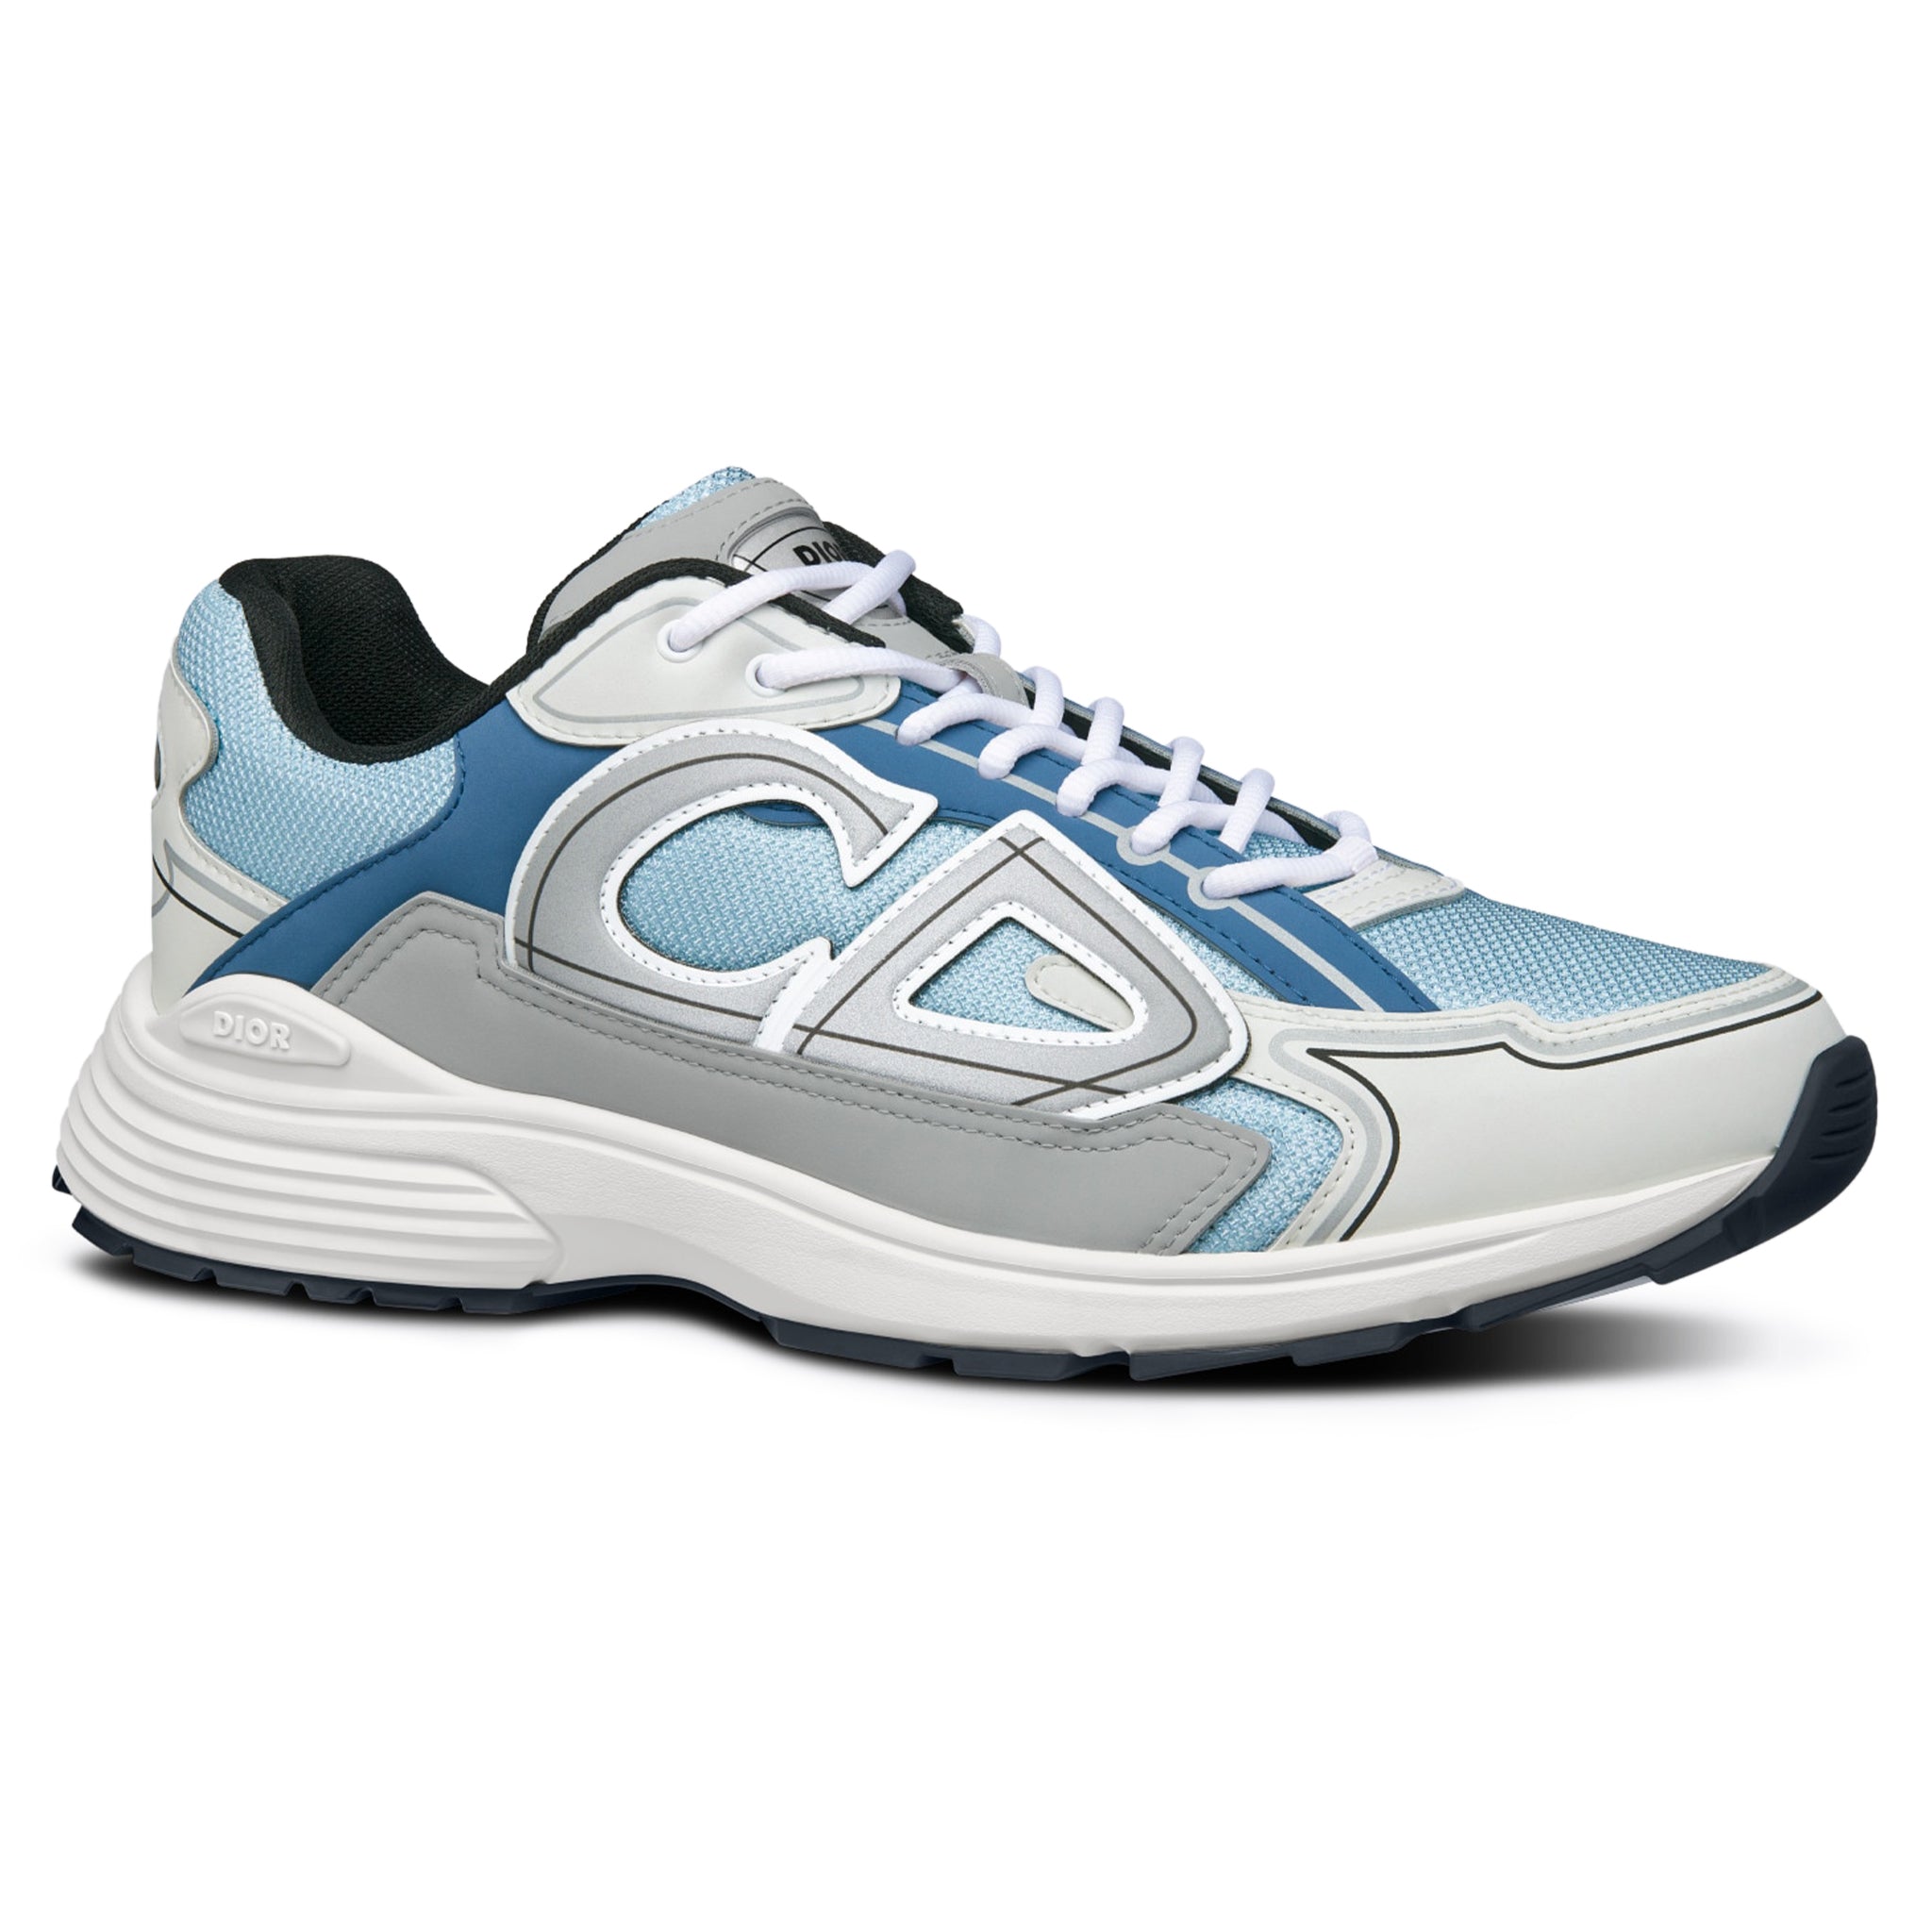 Image of Dior B30 Technical Mesh Light Blue Grey Trainer